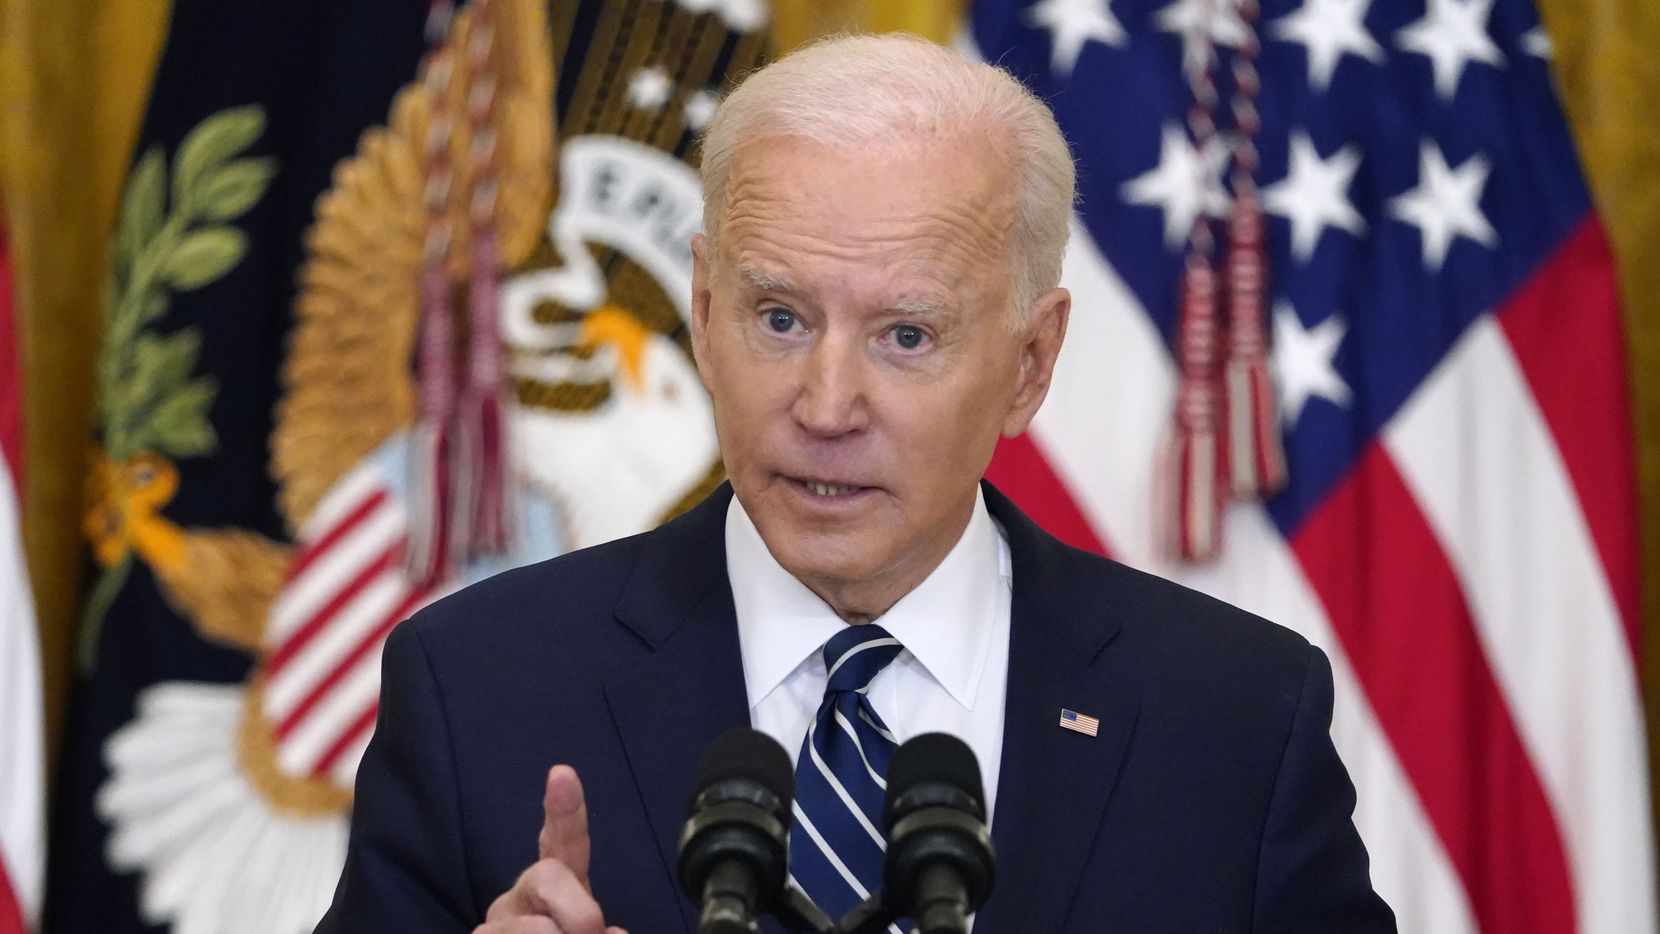 Biden: Economic outlook is getting brighter thanks to the stimulus package